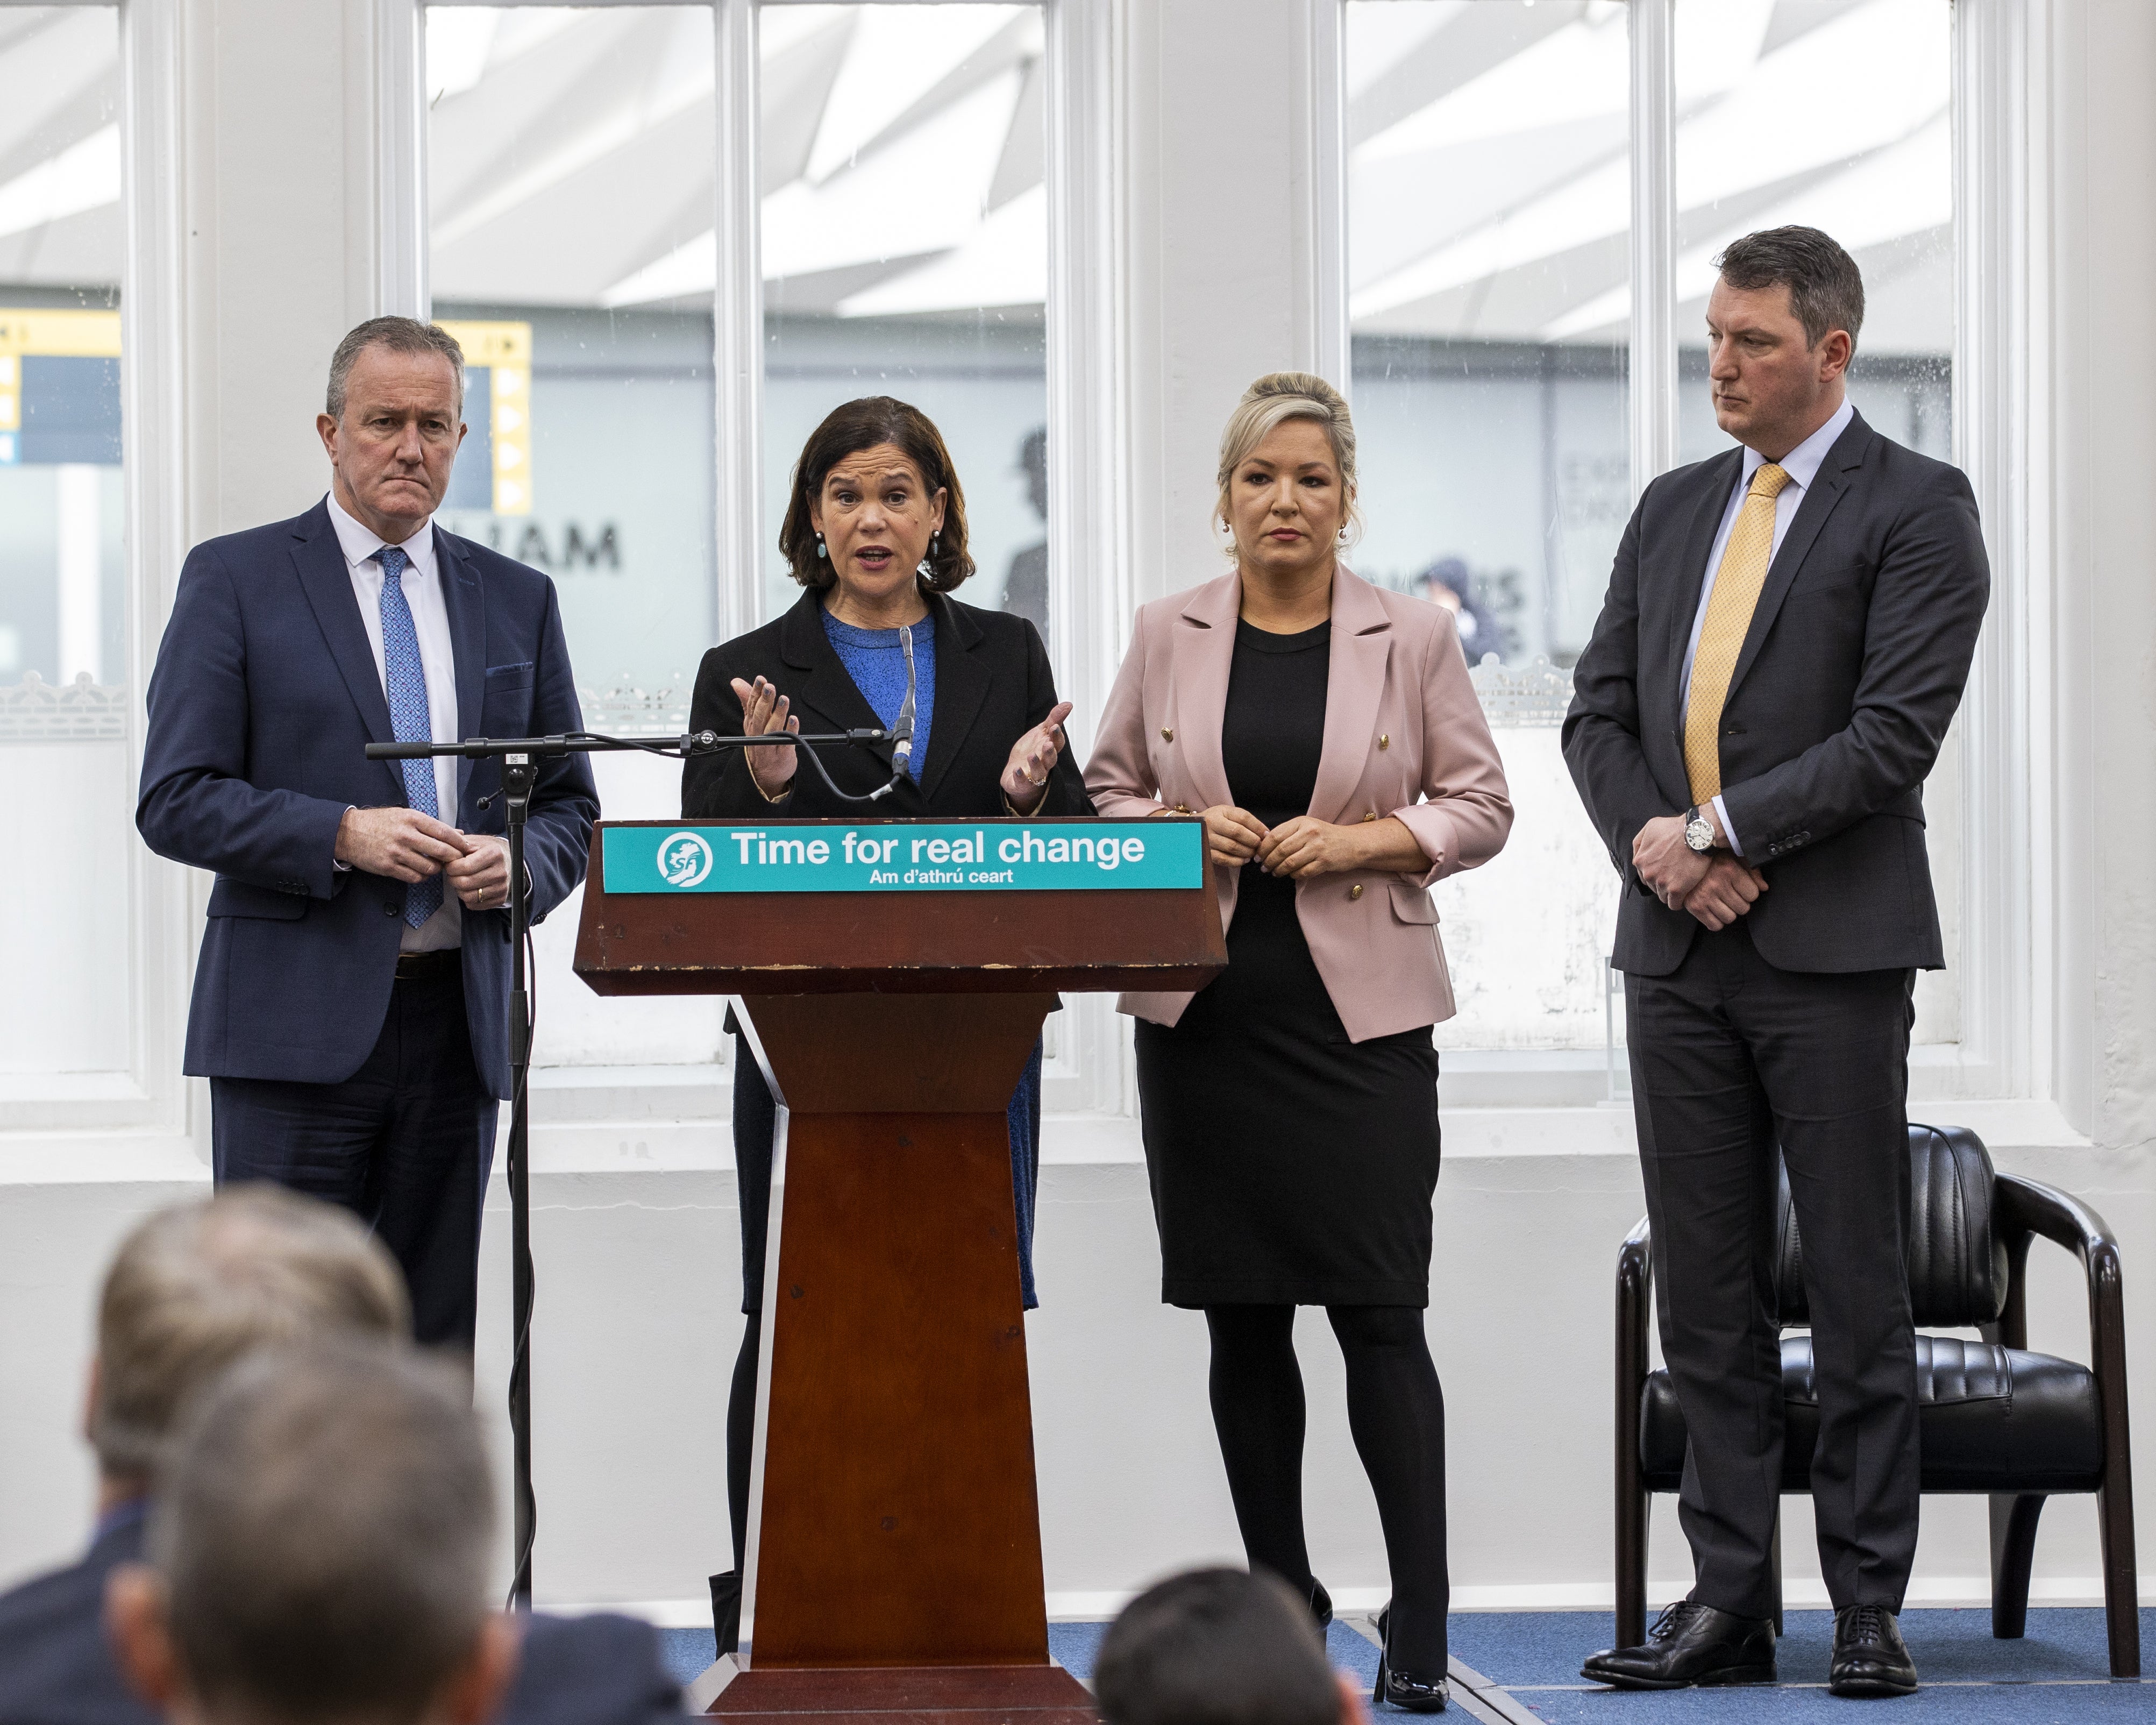 (left to right) Conor Murphy, Sinn Fein leader Mary Lou McDonald, Sinn Fein vice president Michelle O’Neill and John Finucane MP during the Sinn Fein Assembly election candidate launch (Liam McBurney/PA)